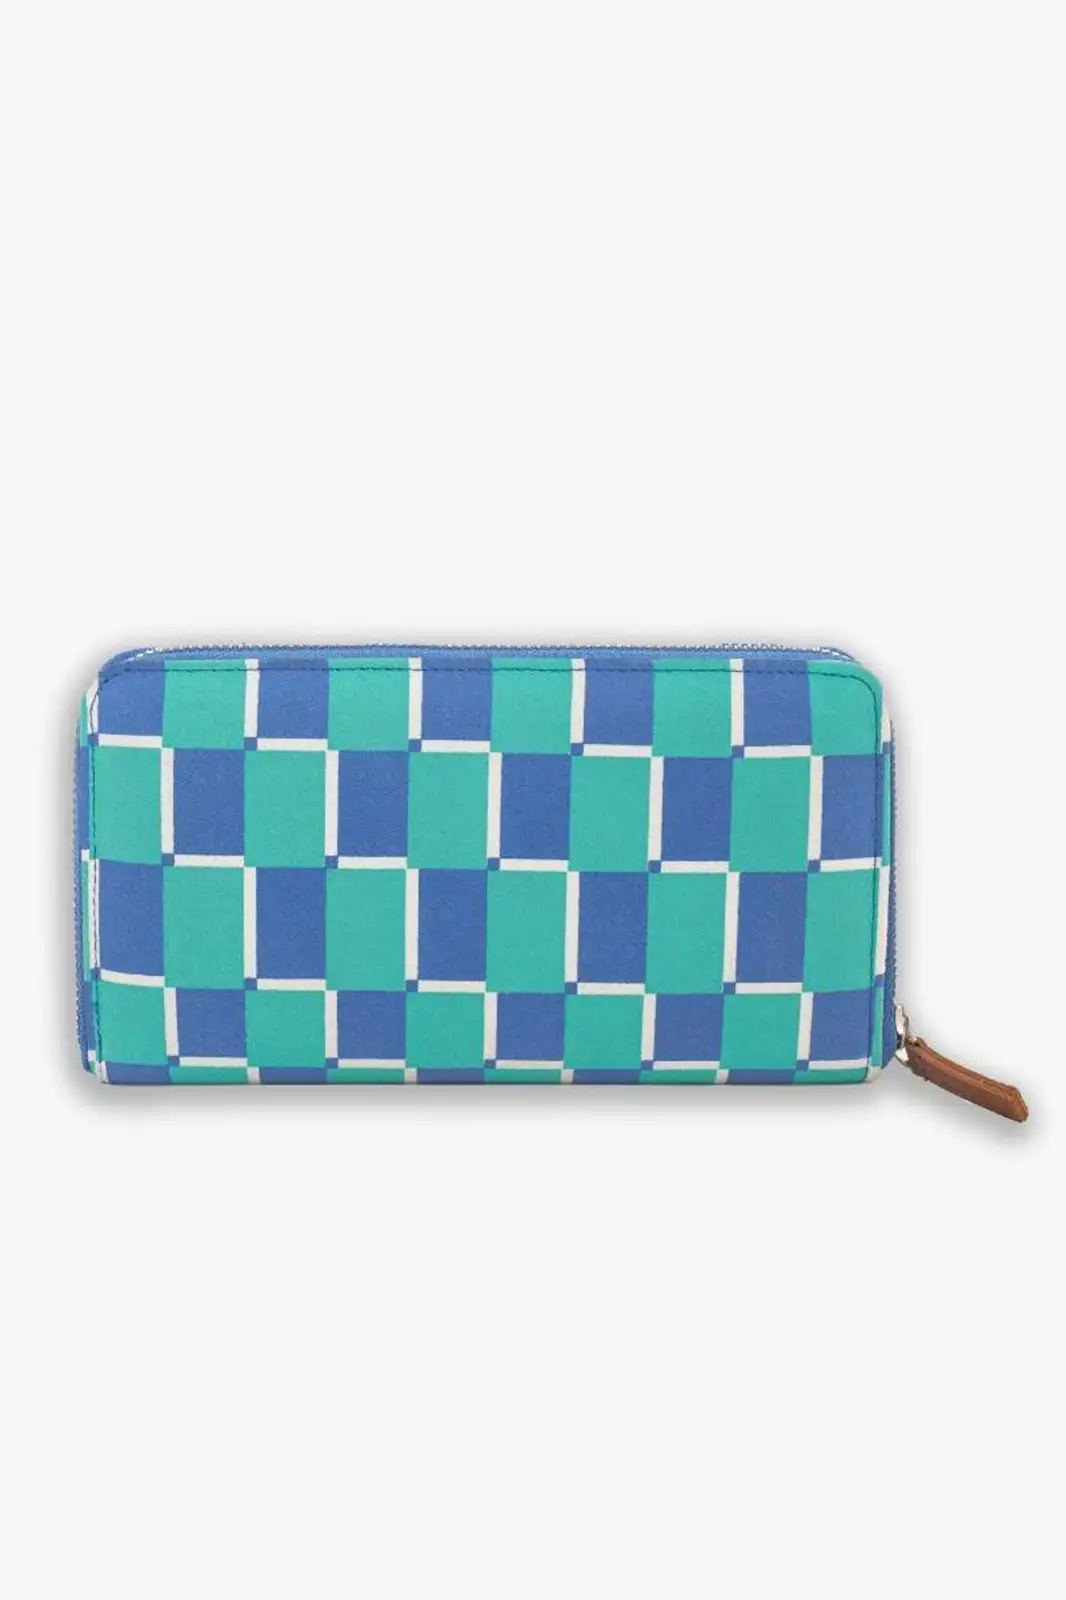 the wallet meandering mosaics, wallet for woman, wallet ladies, small women wallet, small wallet ladies, purse wallet, mini purse wallet, non leather wallets, high design wallet, non leather wallets for women, branded wallets for women, luxury wallets, trendy wallets for ladies, ecoright